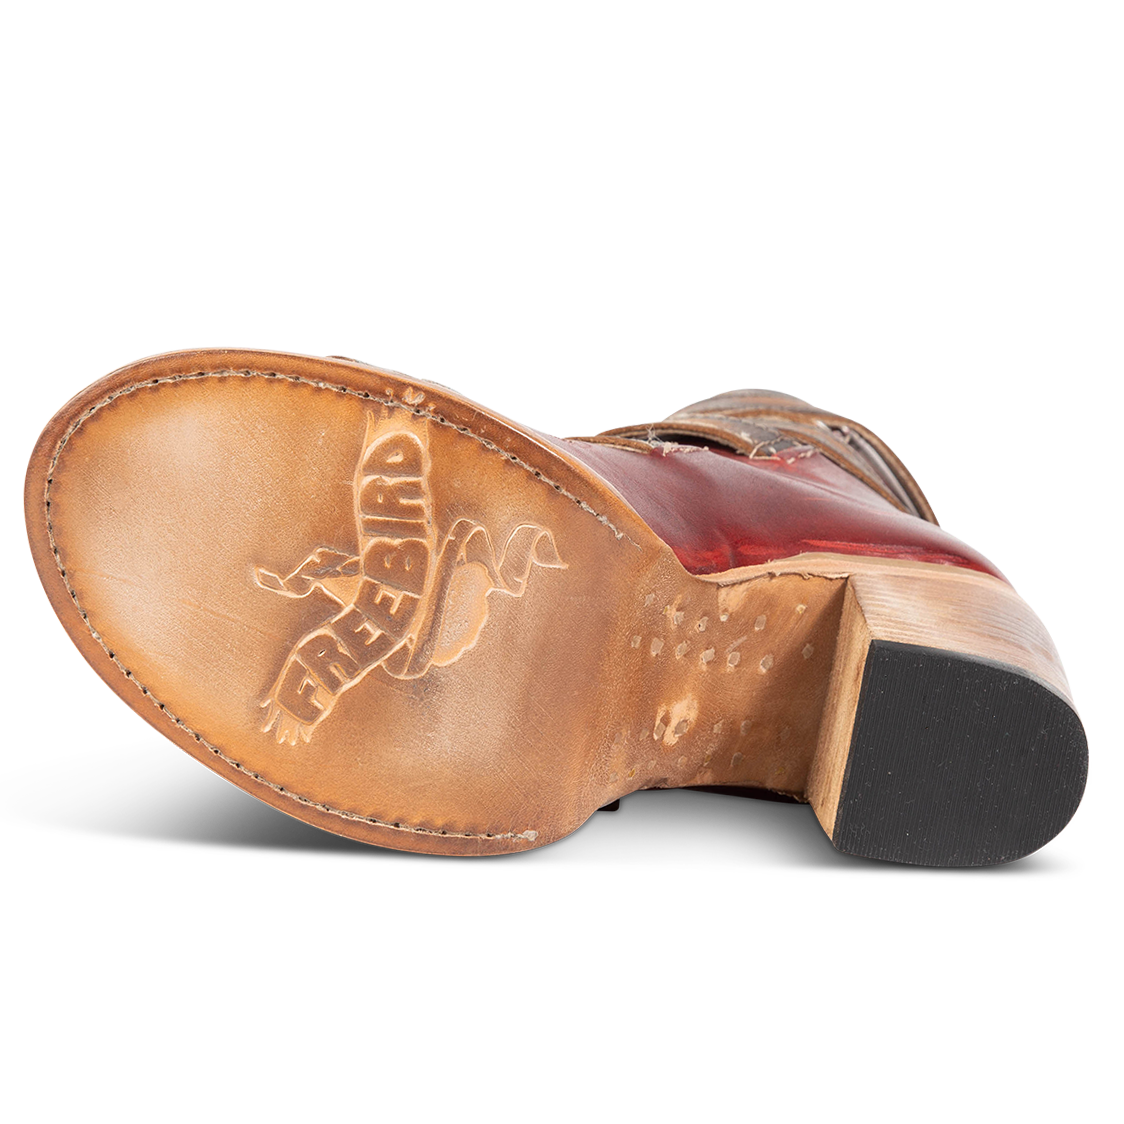 Leather sole imprinted with FREEBIRD on women's Bond red multi sandal